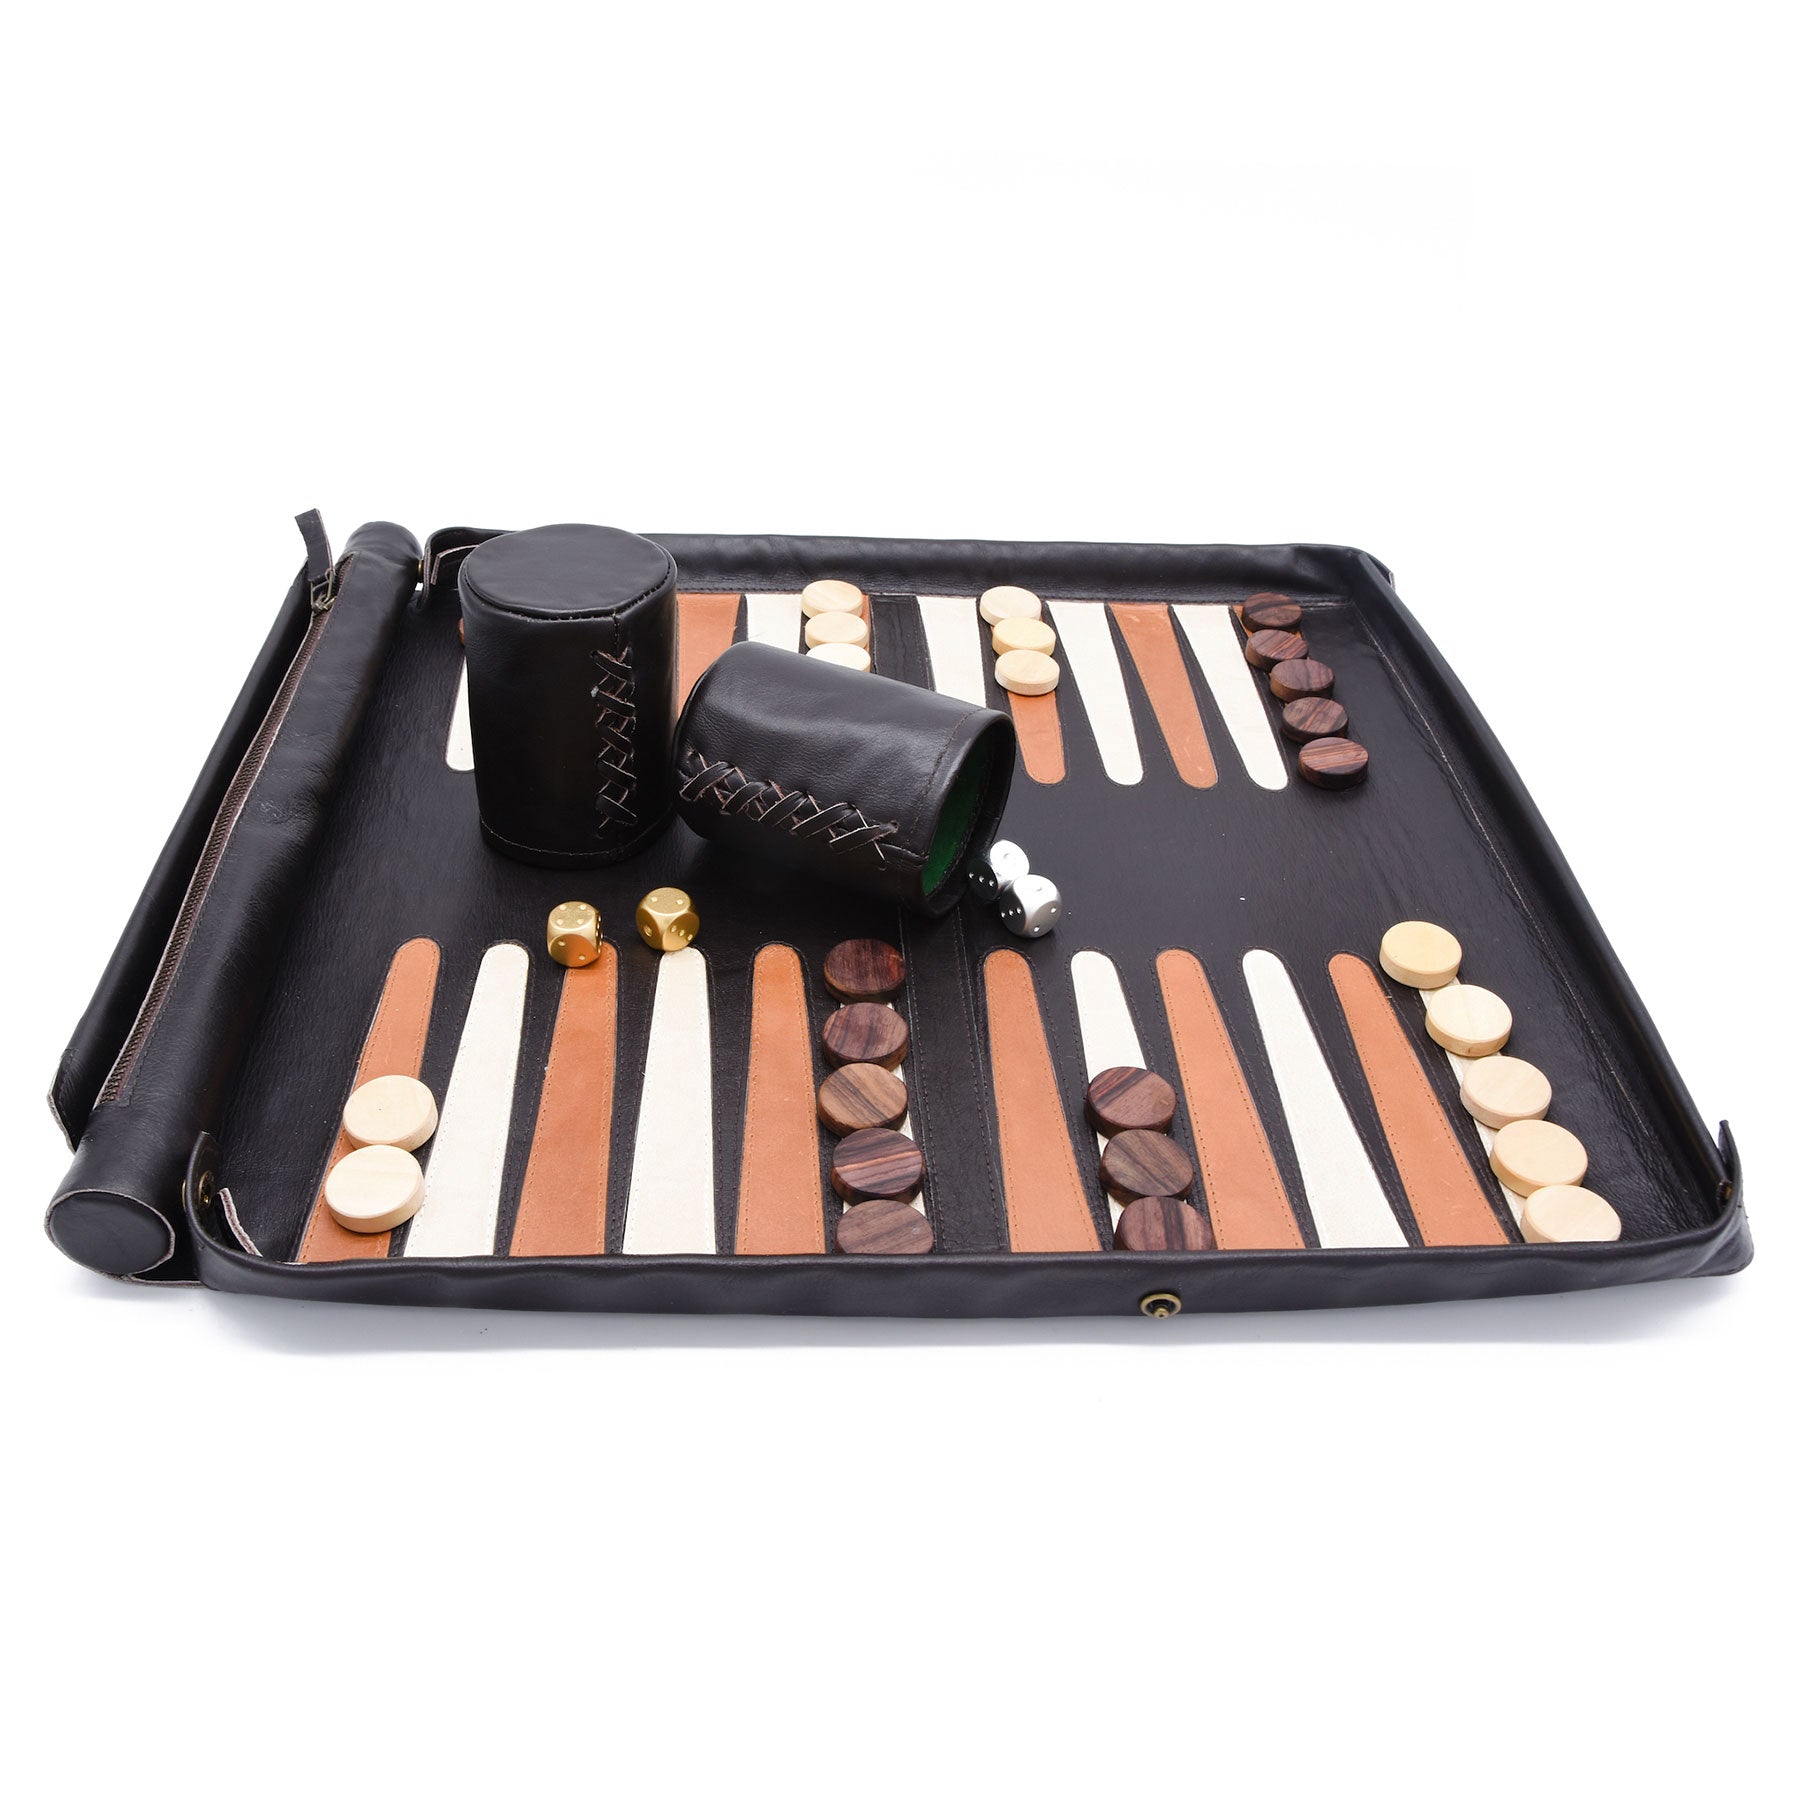 Dark brown backgammon set with resin checkers